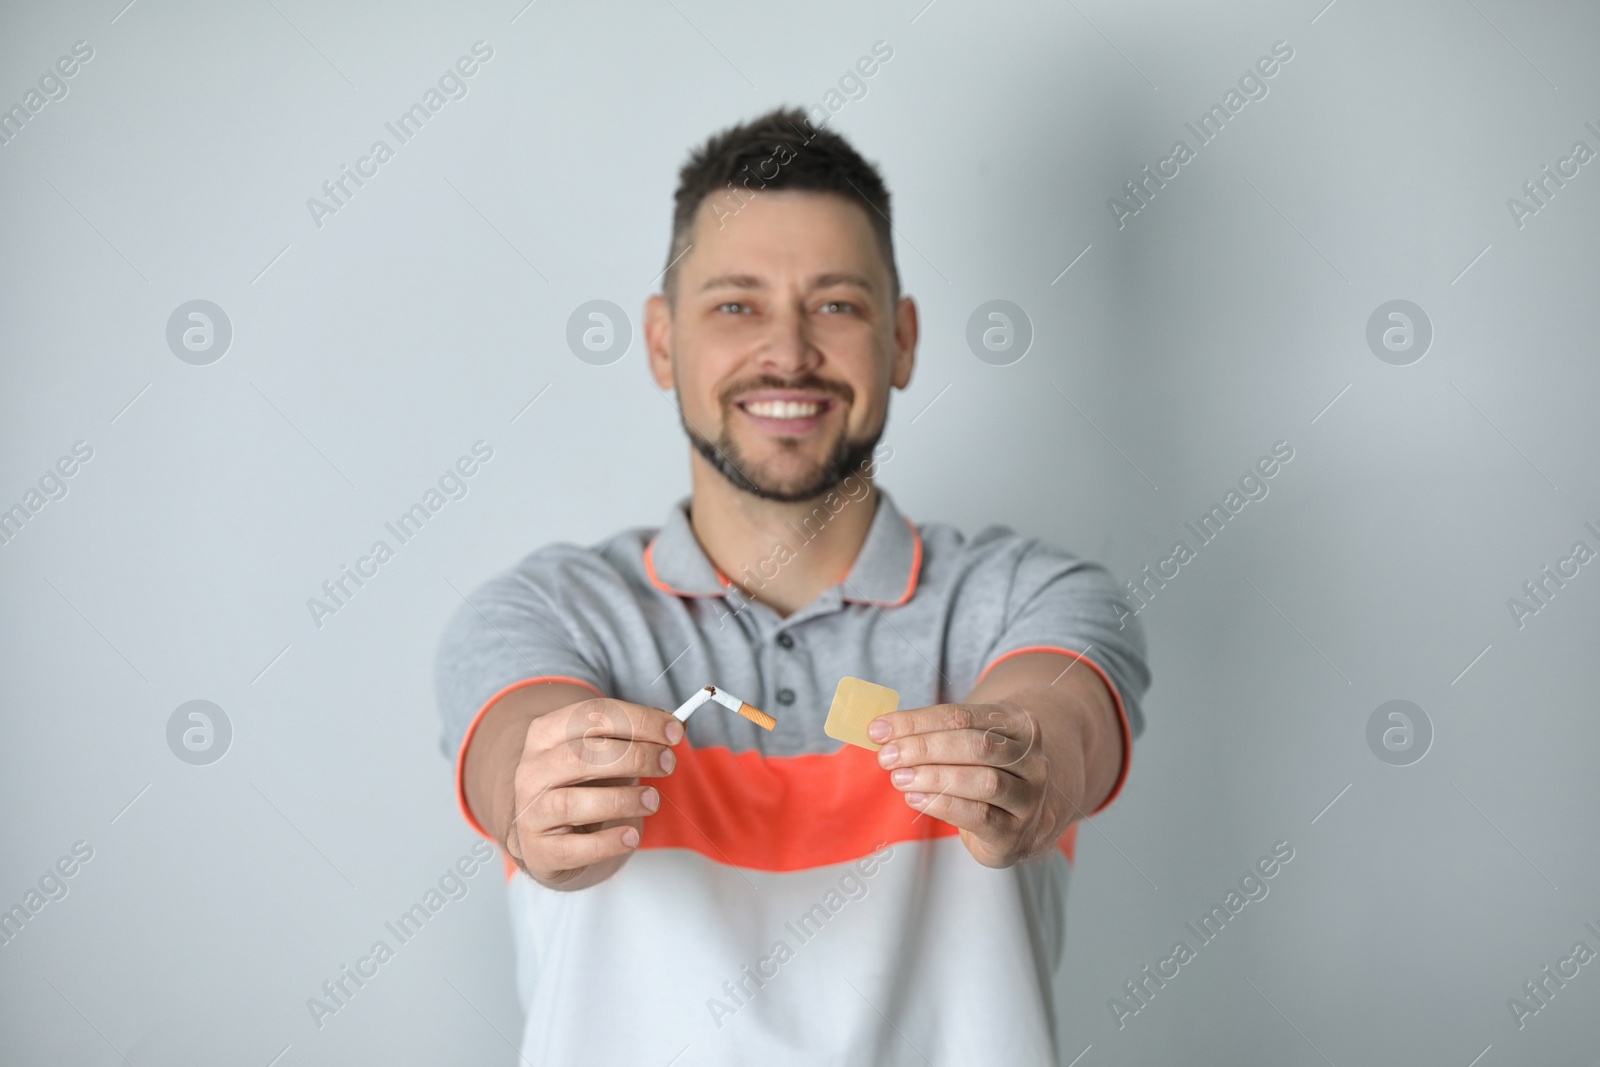 Photo of Happy man with nicotine patch and cigarette against light grey background, focus on hands